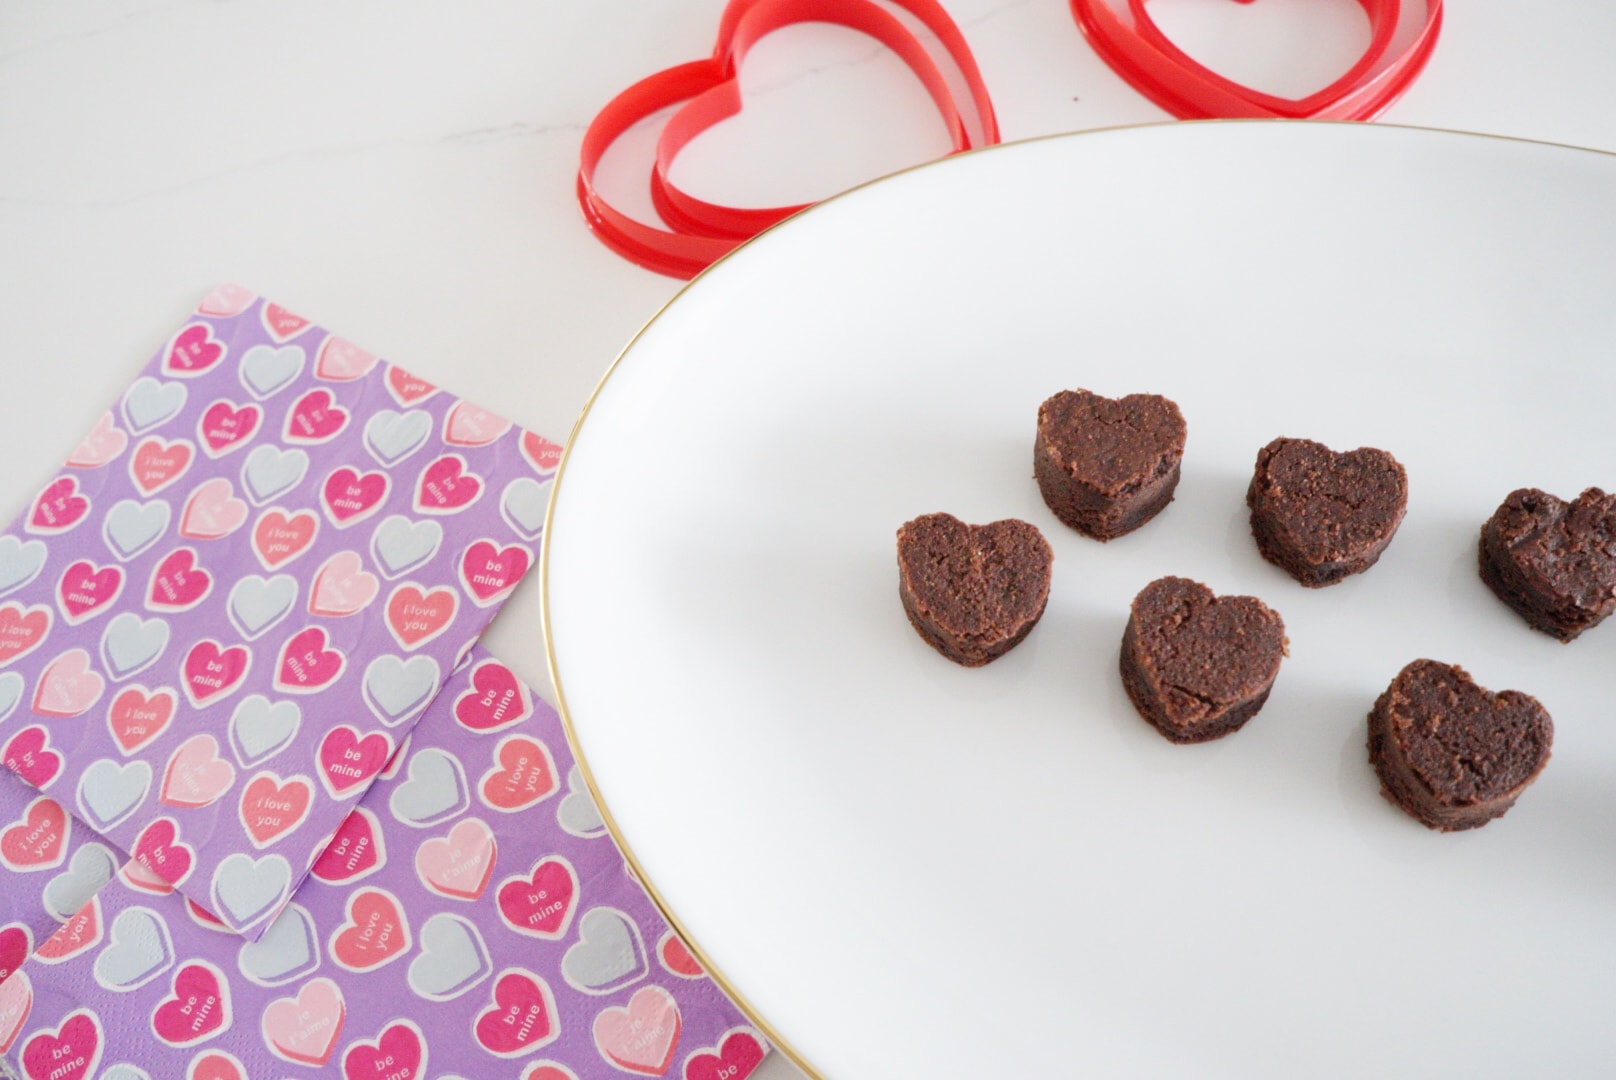 Easy and Delicious One Bite Valentine's Day Chocolate Brownies